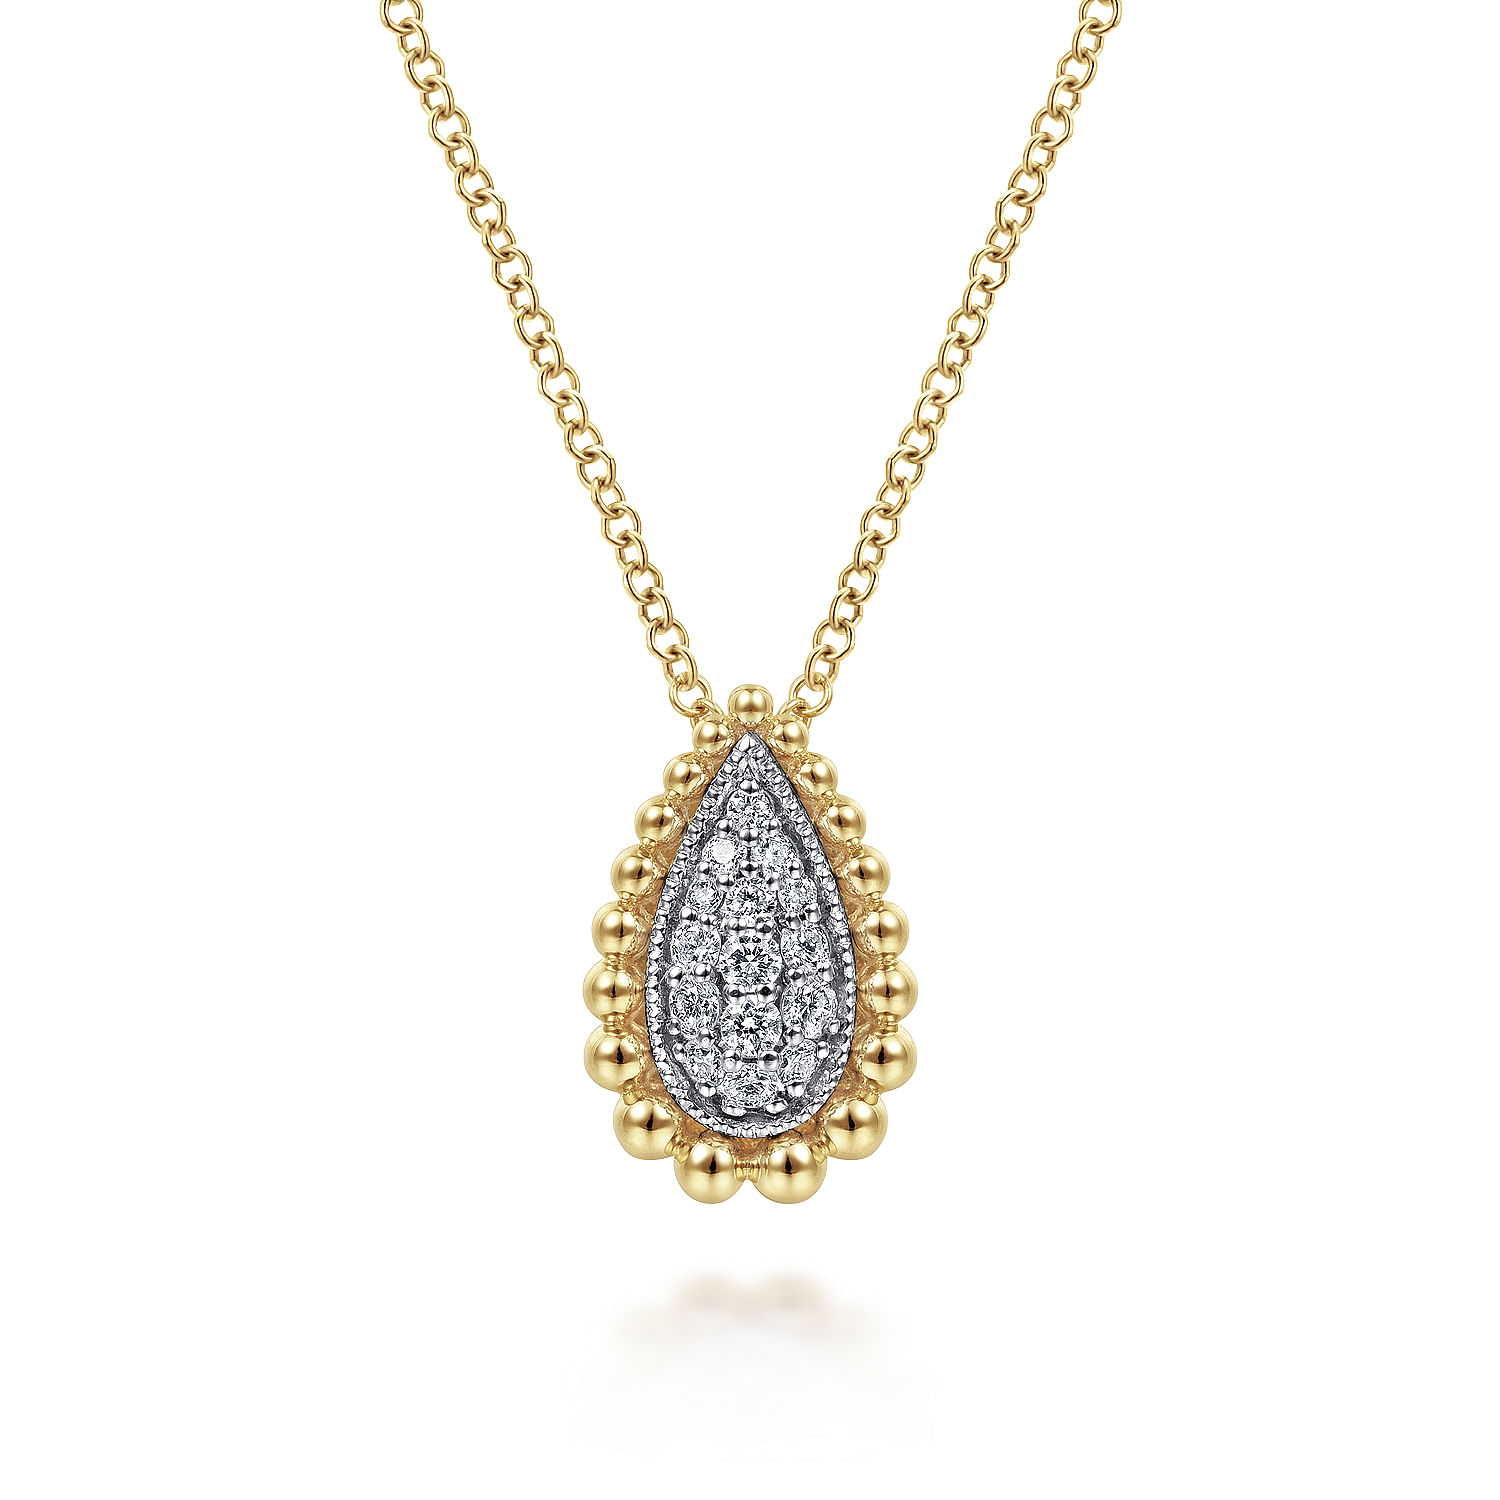 14K Yellow Gold Teardrop Diamond Pave Pendant Necklace with Beaded Frame